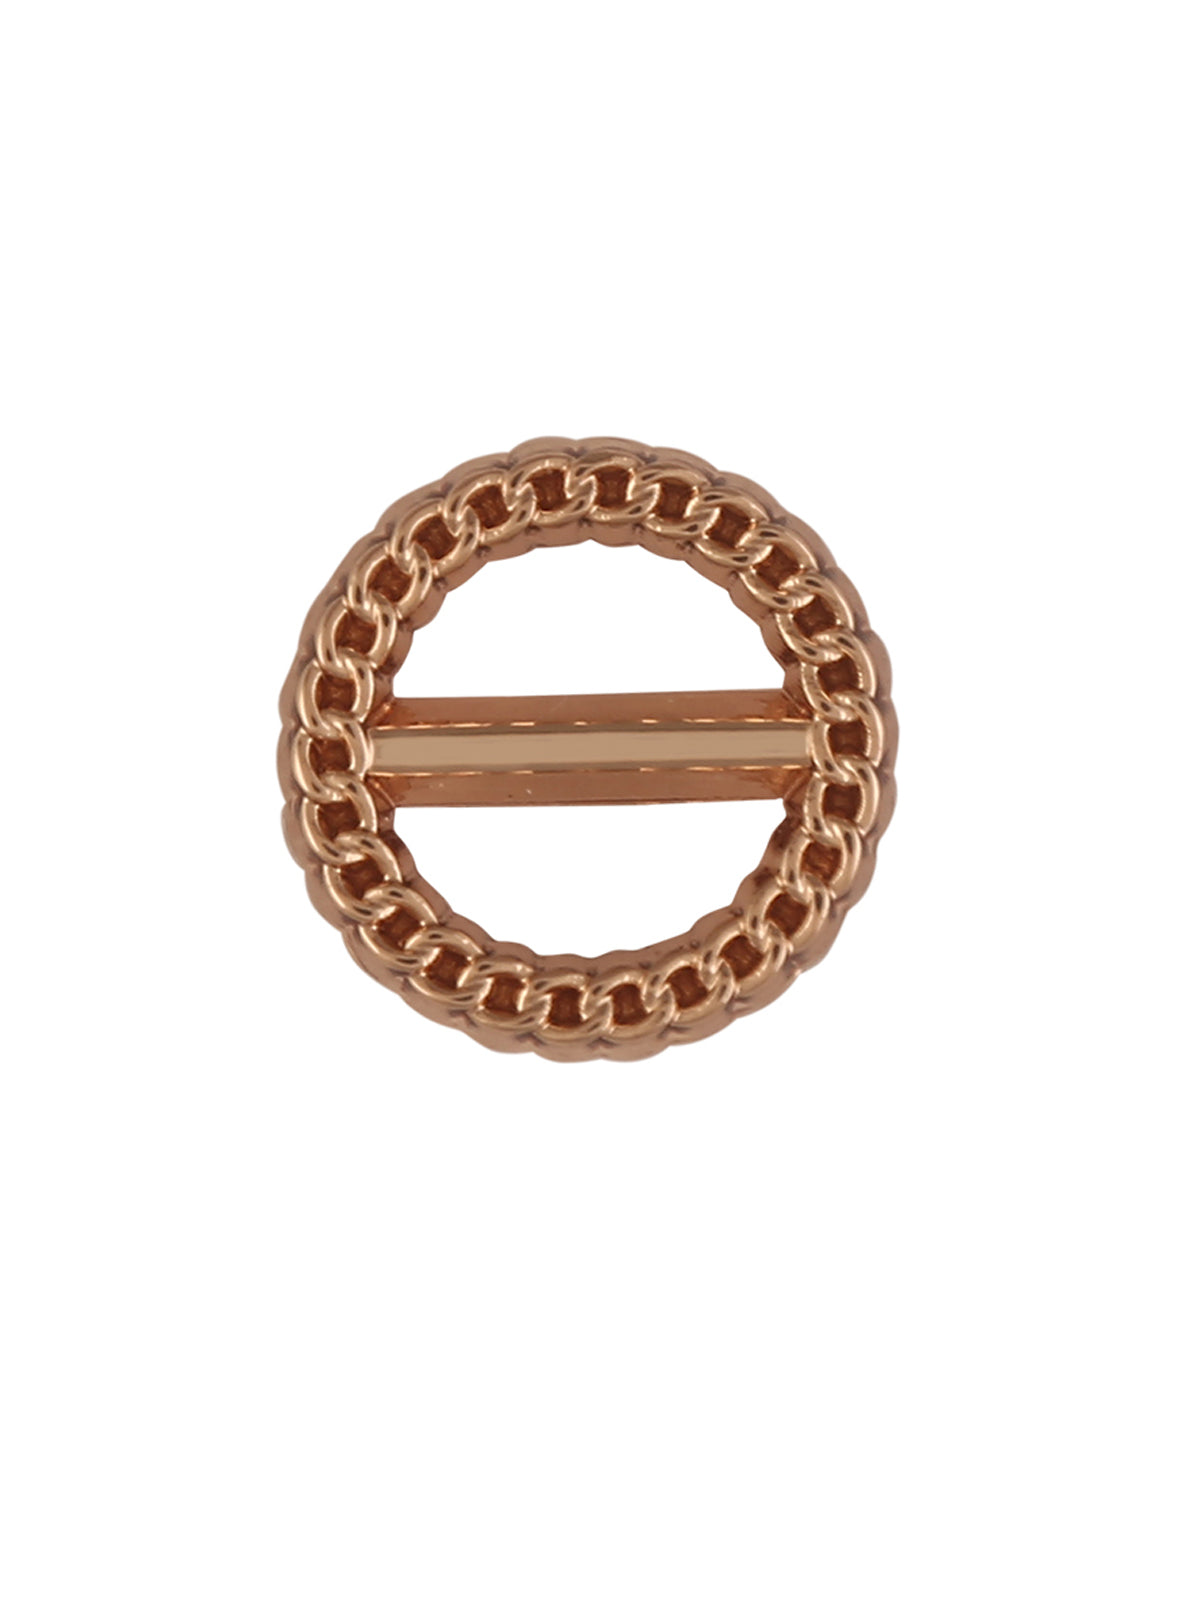 Round Ring Shape with Chain like Edges Fancy Golden Color Button